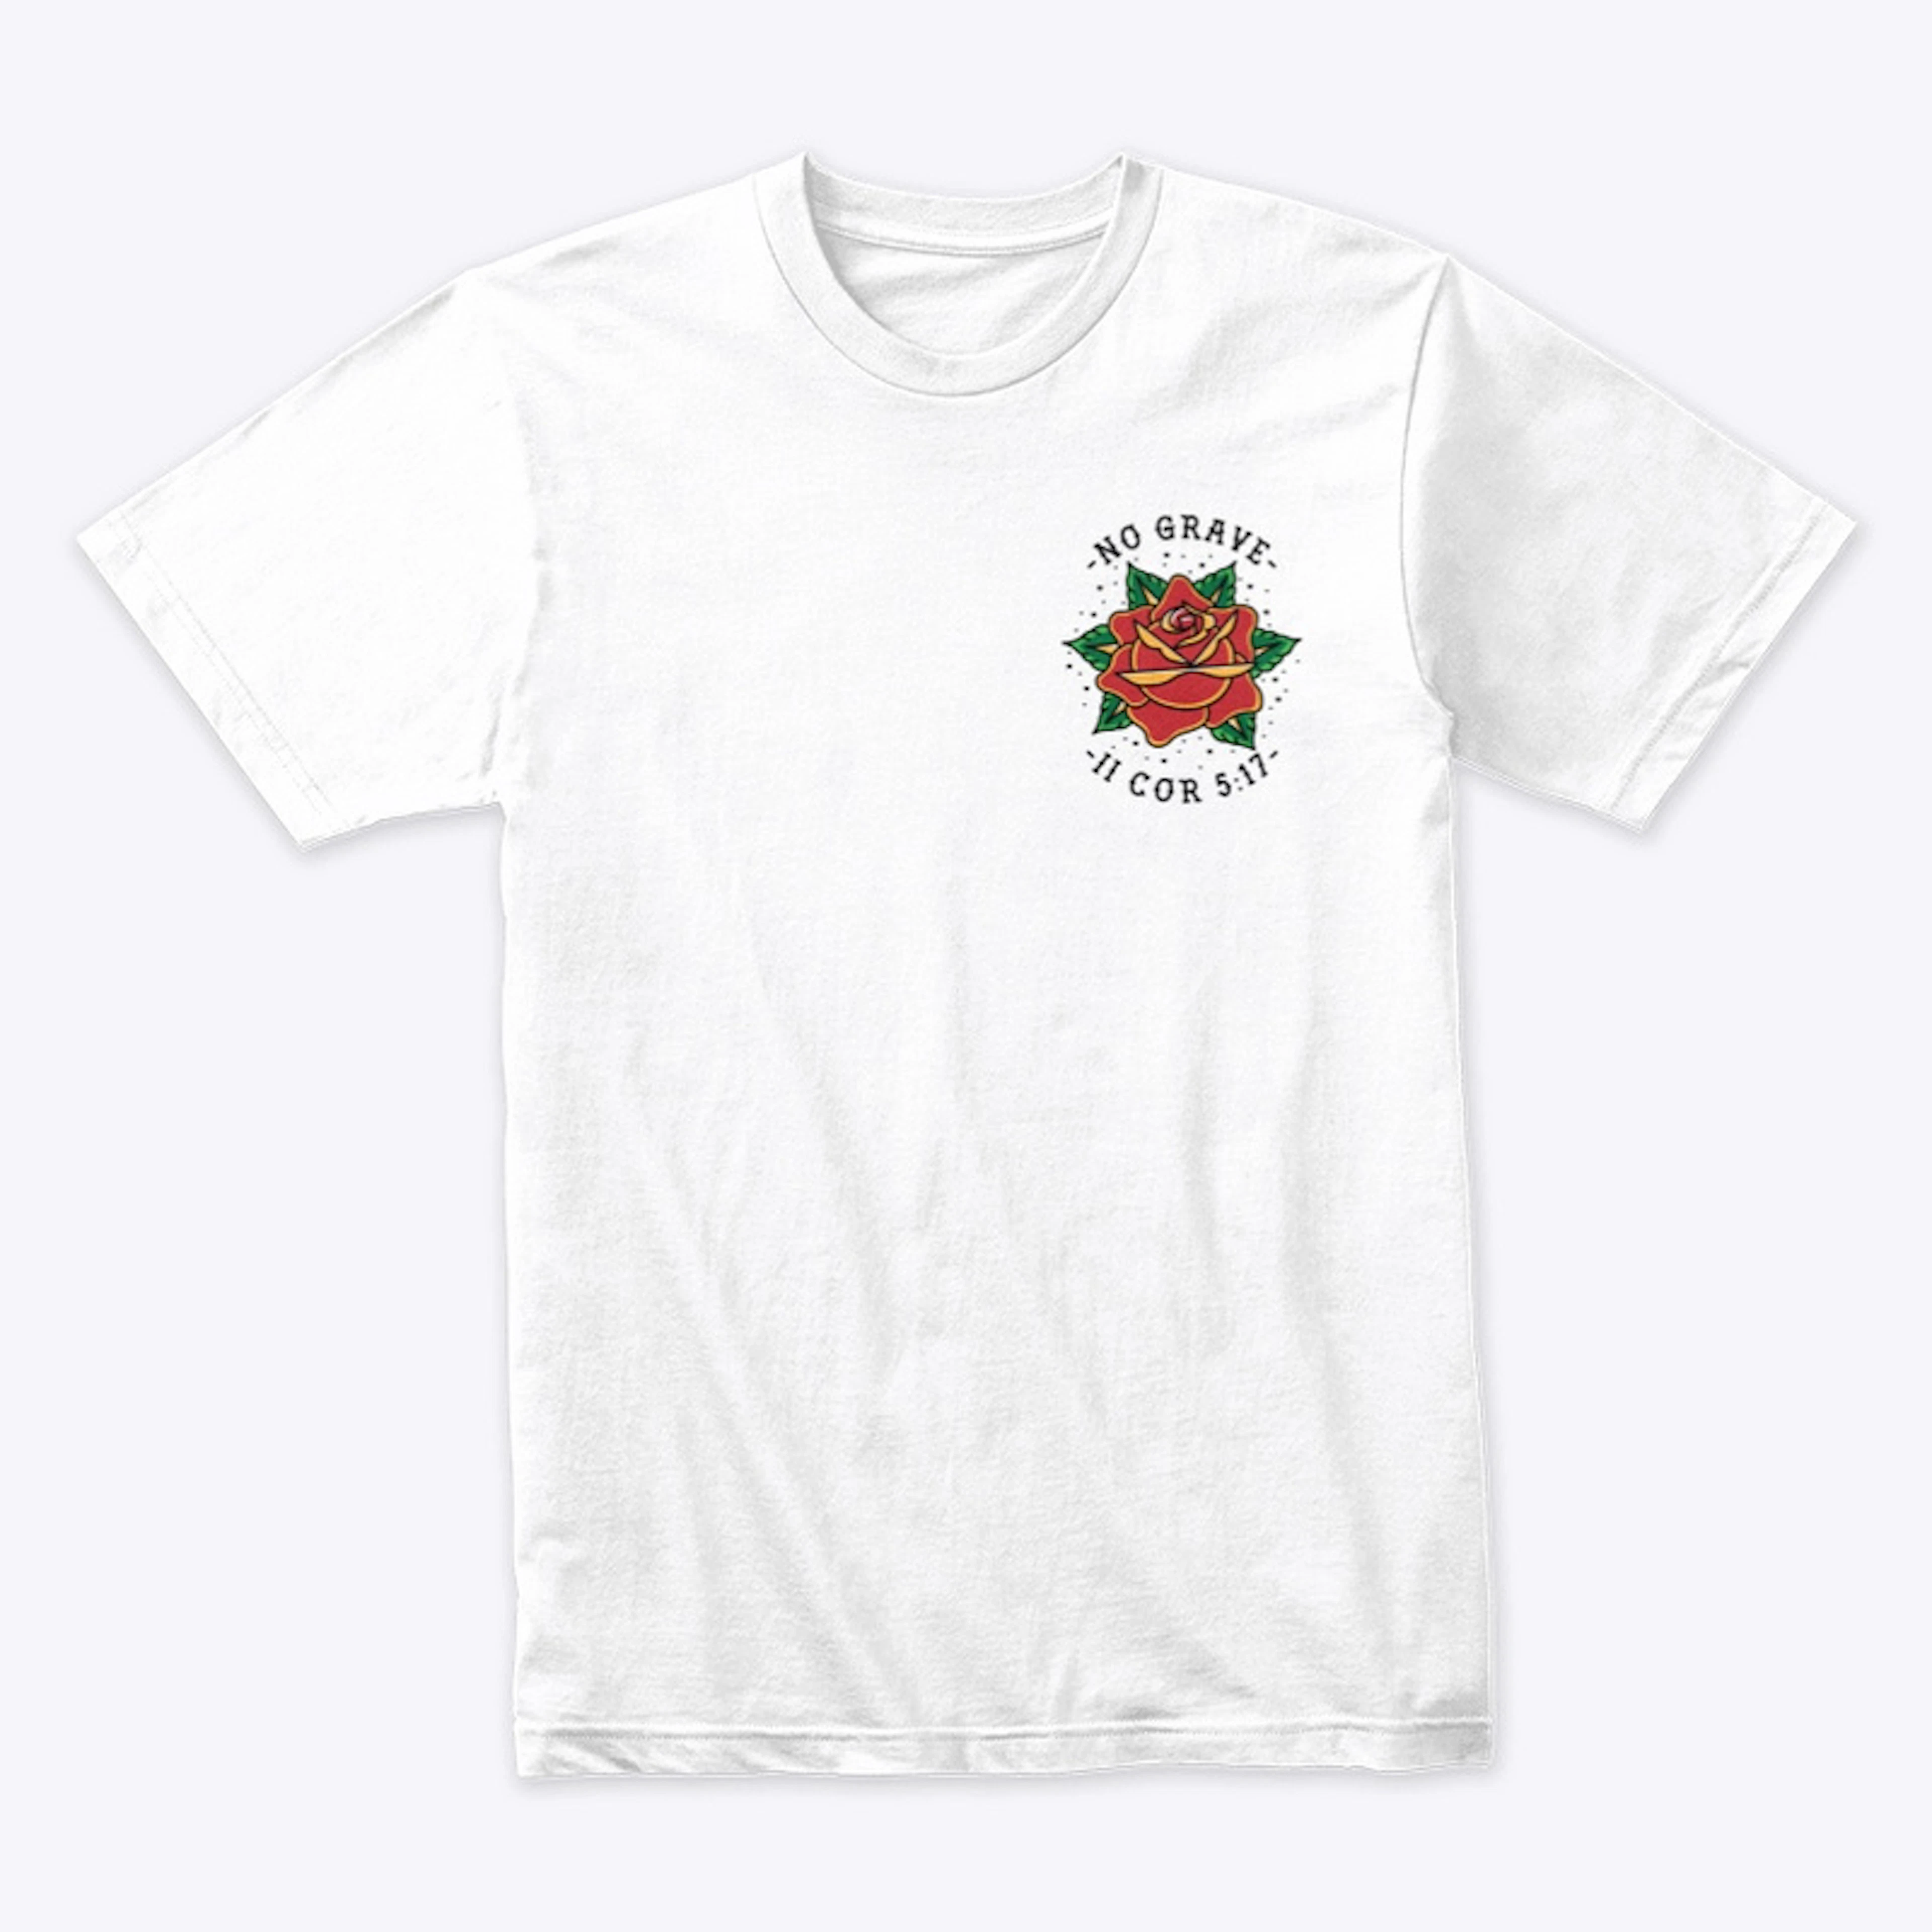 NO GRAVE - "MADE NEW" TEE